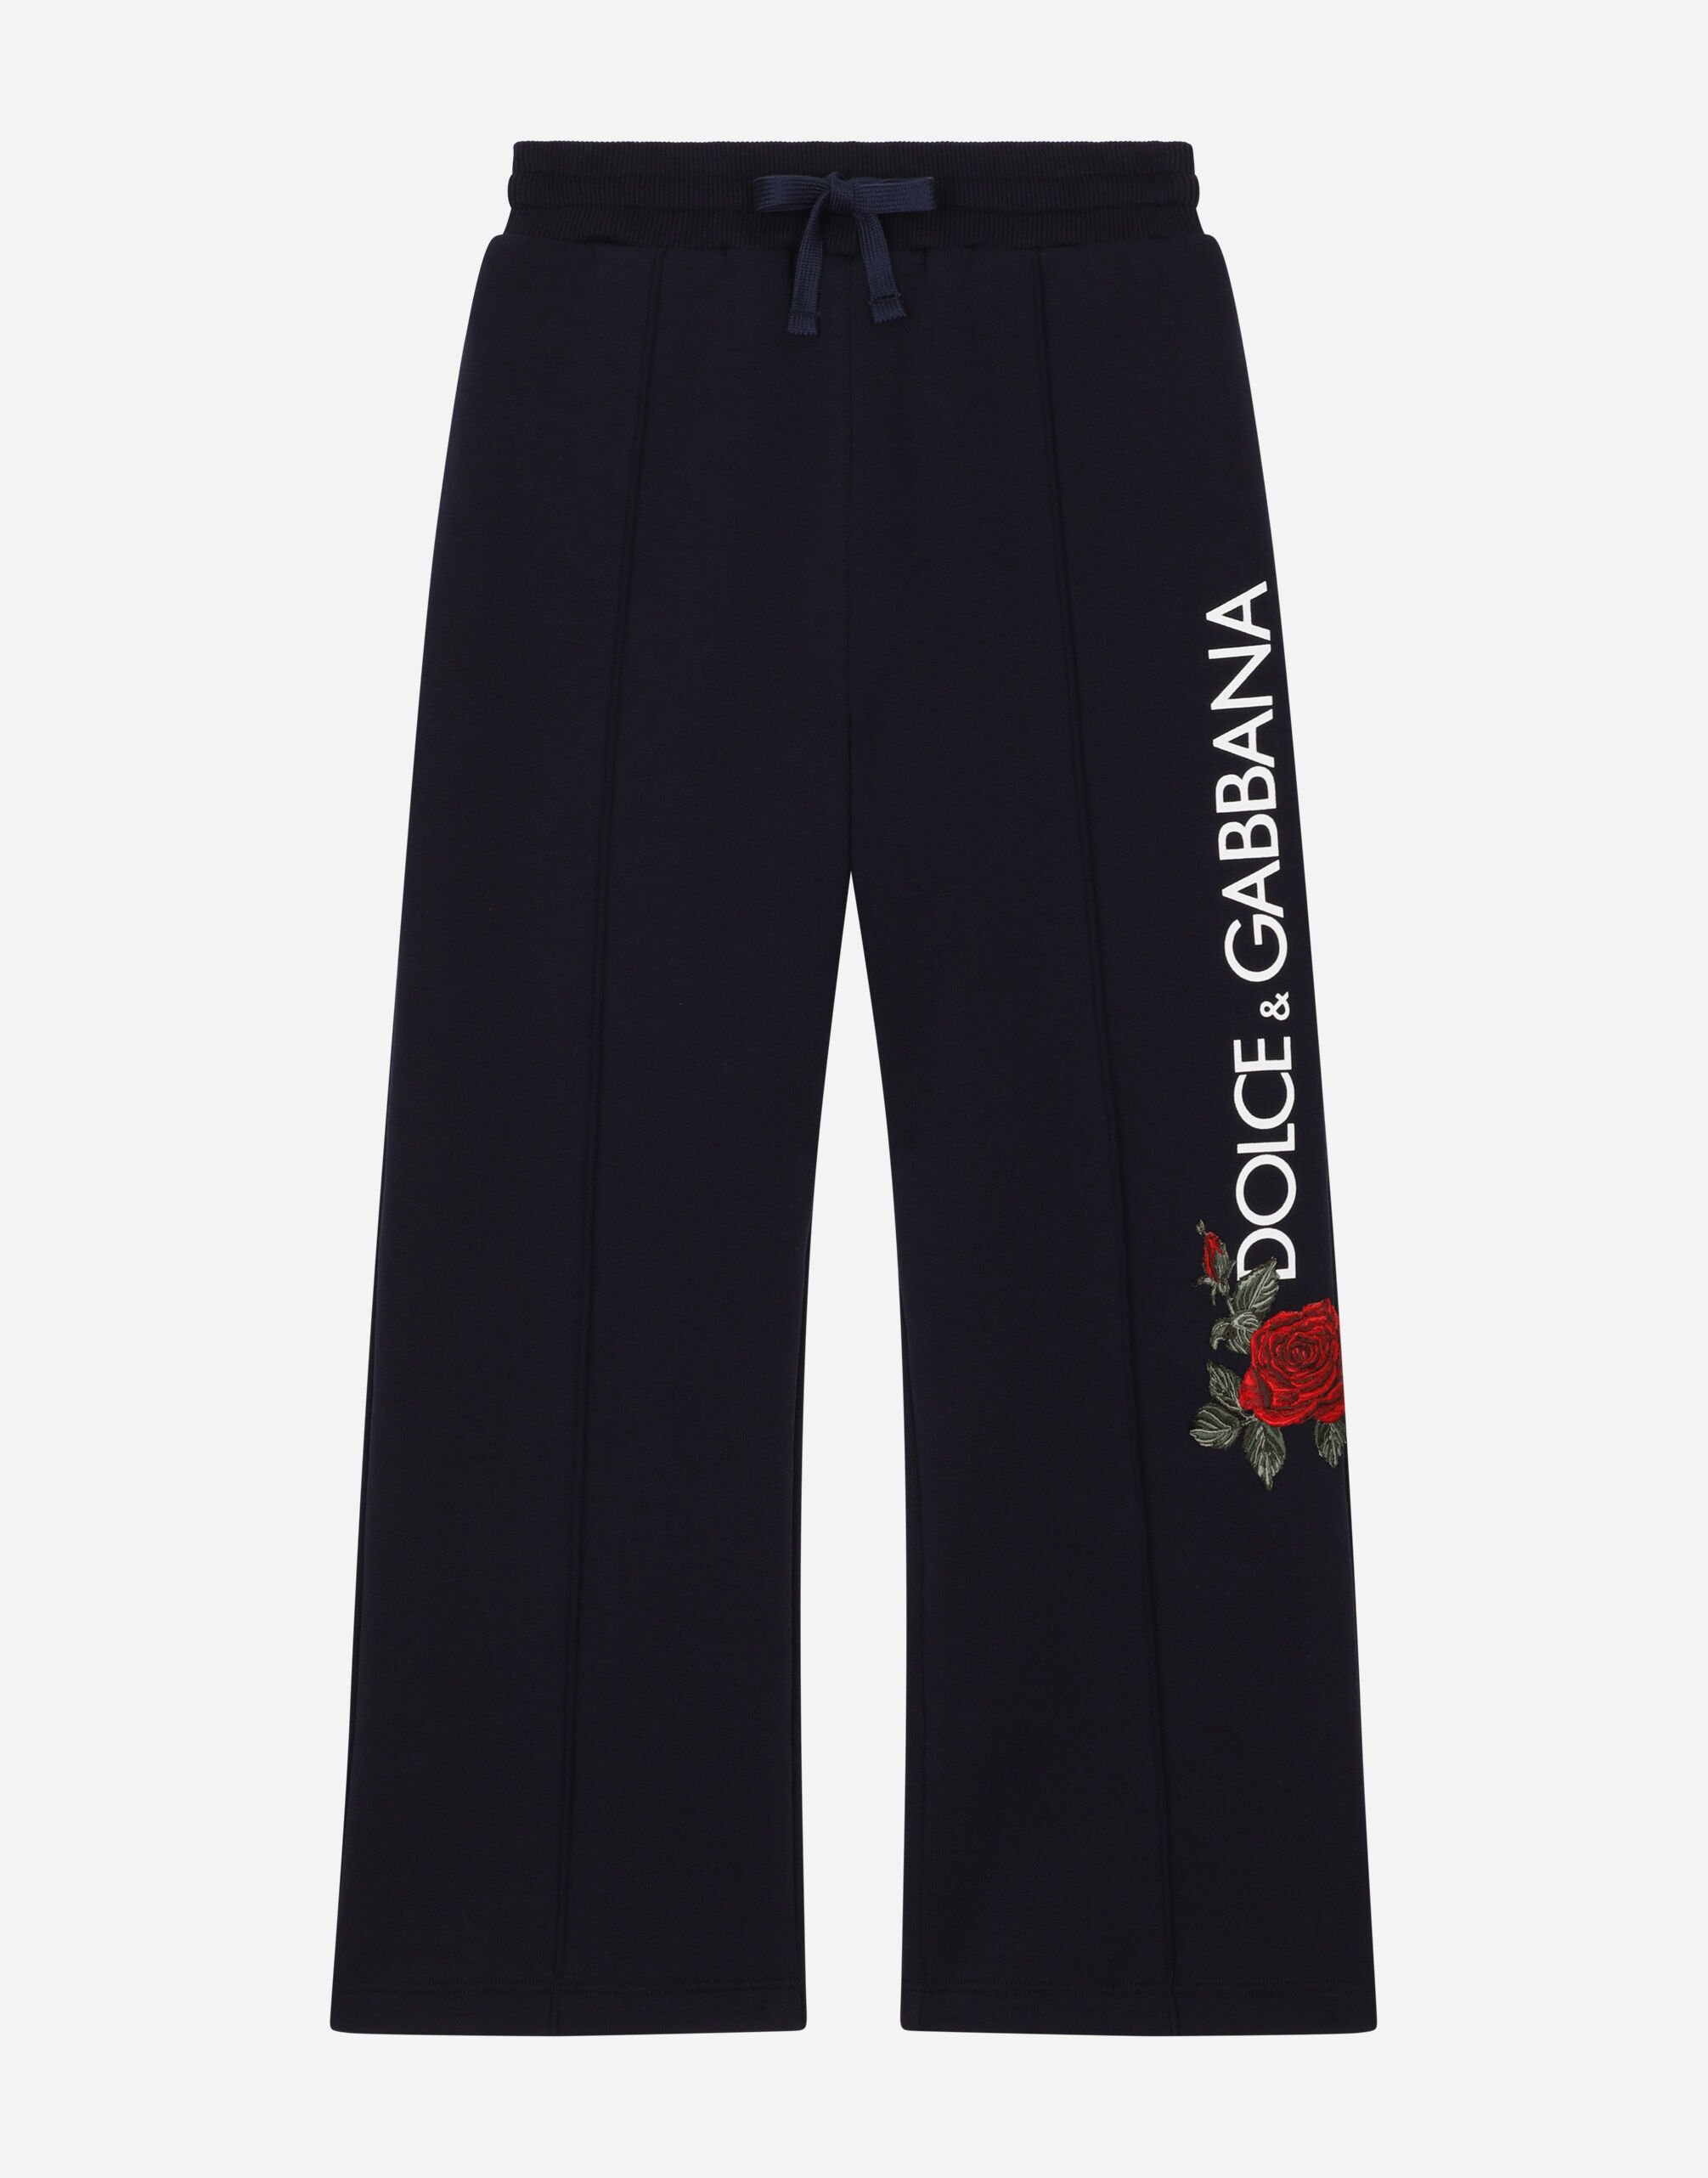 ${brand} Jersey jogging pants with logo and rose print ${colorDescription} ${masterID}